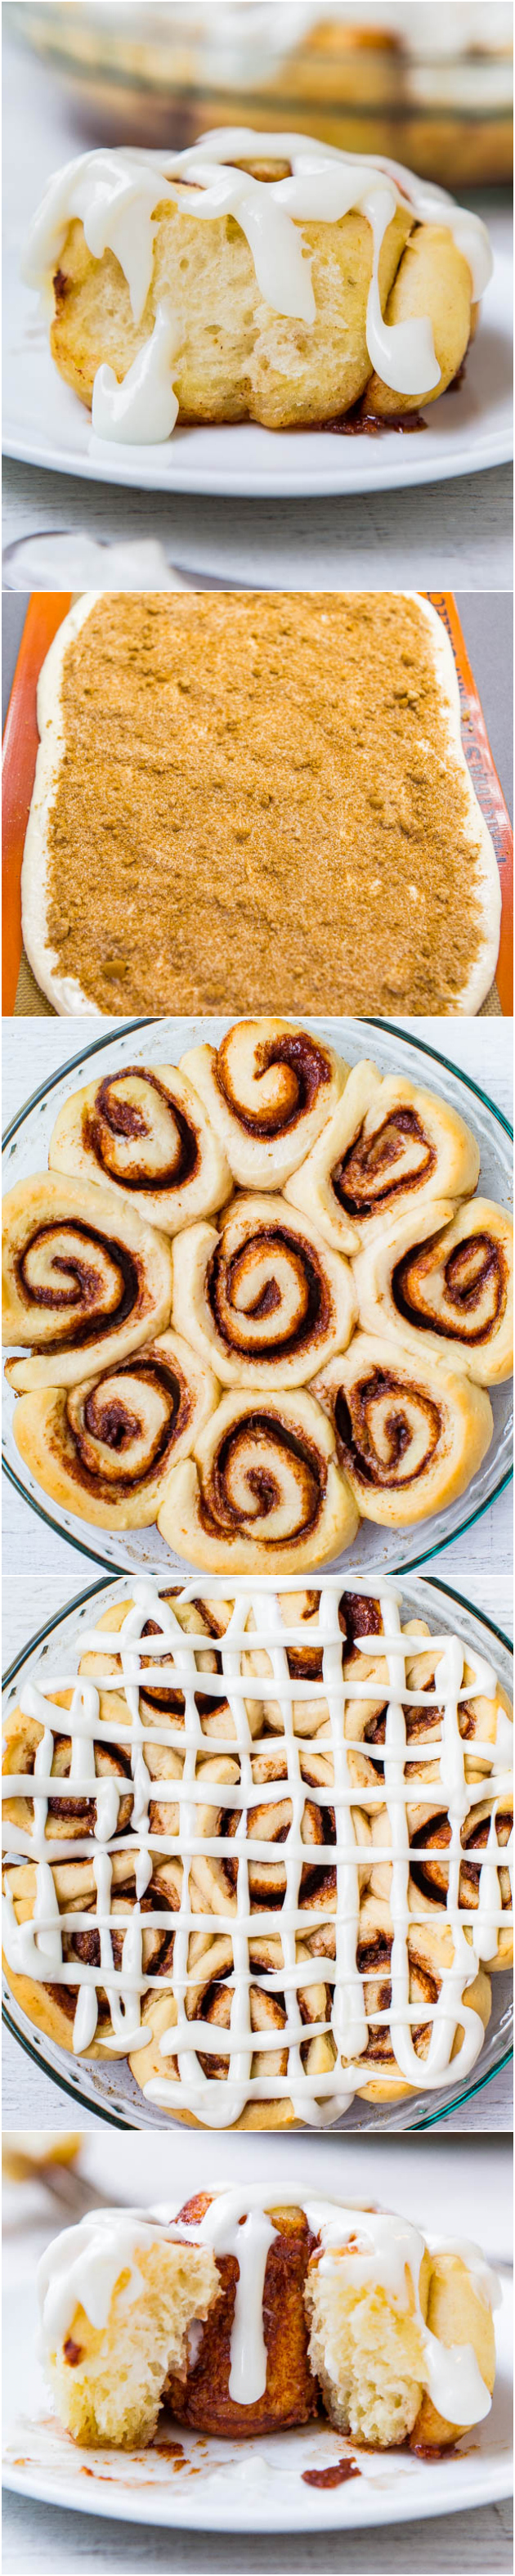 1-Hour Homemade Cinnamon Rolls with Cream Cheese Frosting — It's possible to make soft, light, fluffy cinnamon rolls from scratch in 1 hour! These are yeast cinnamon rolls topped with a homemade cream cheese frosting. 